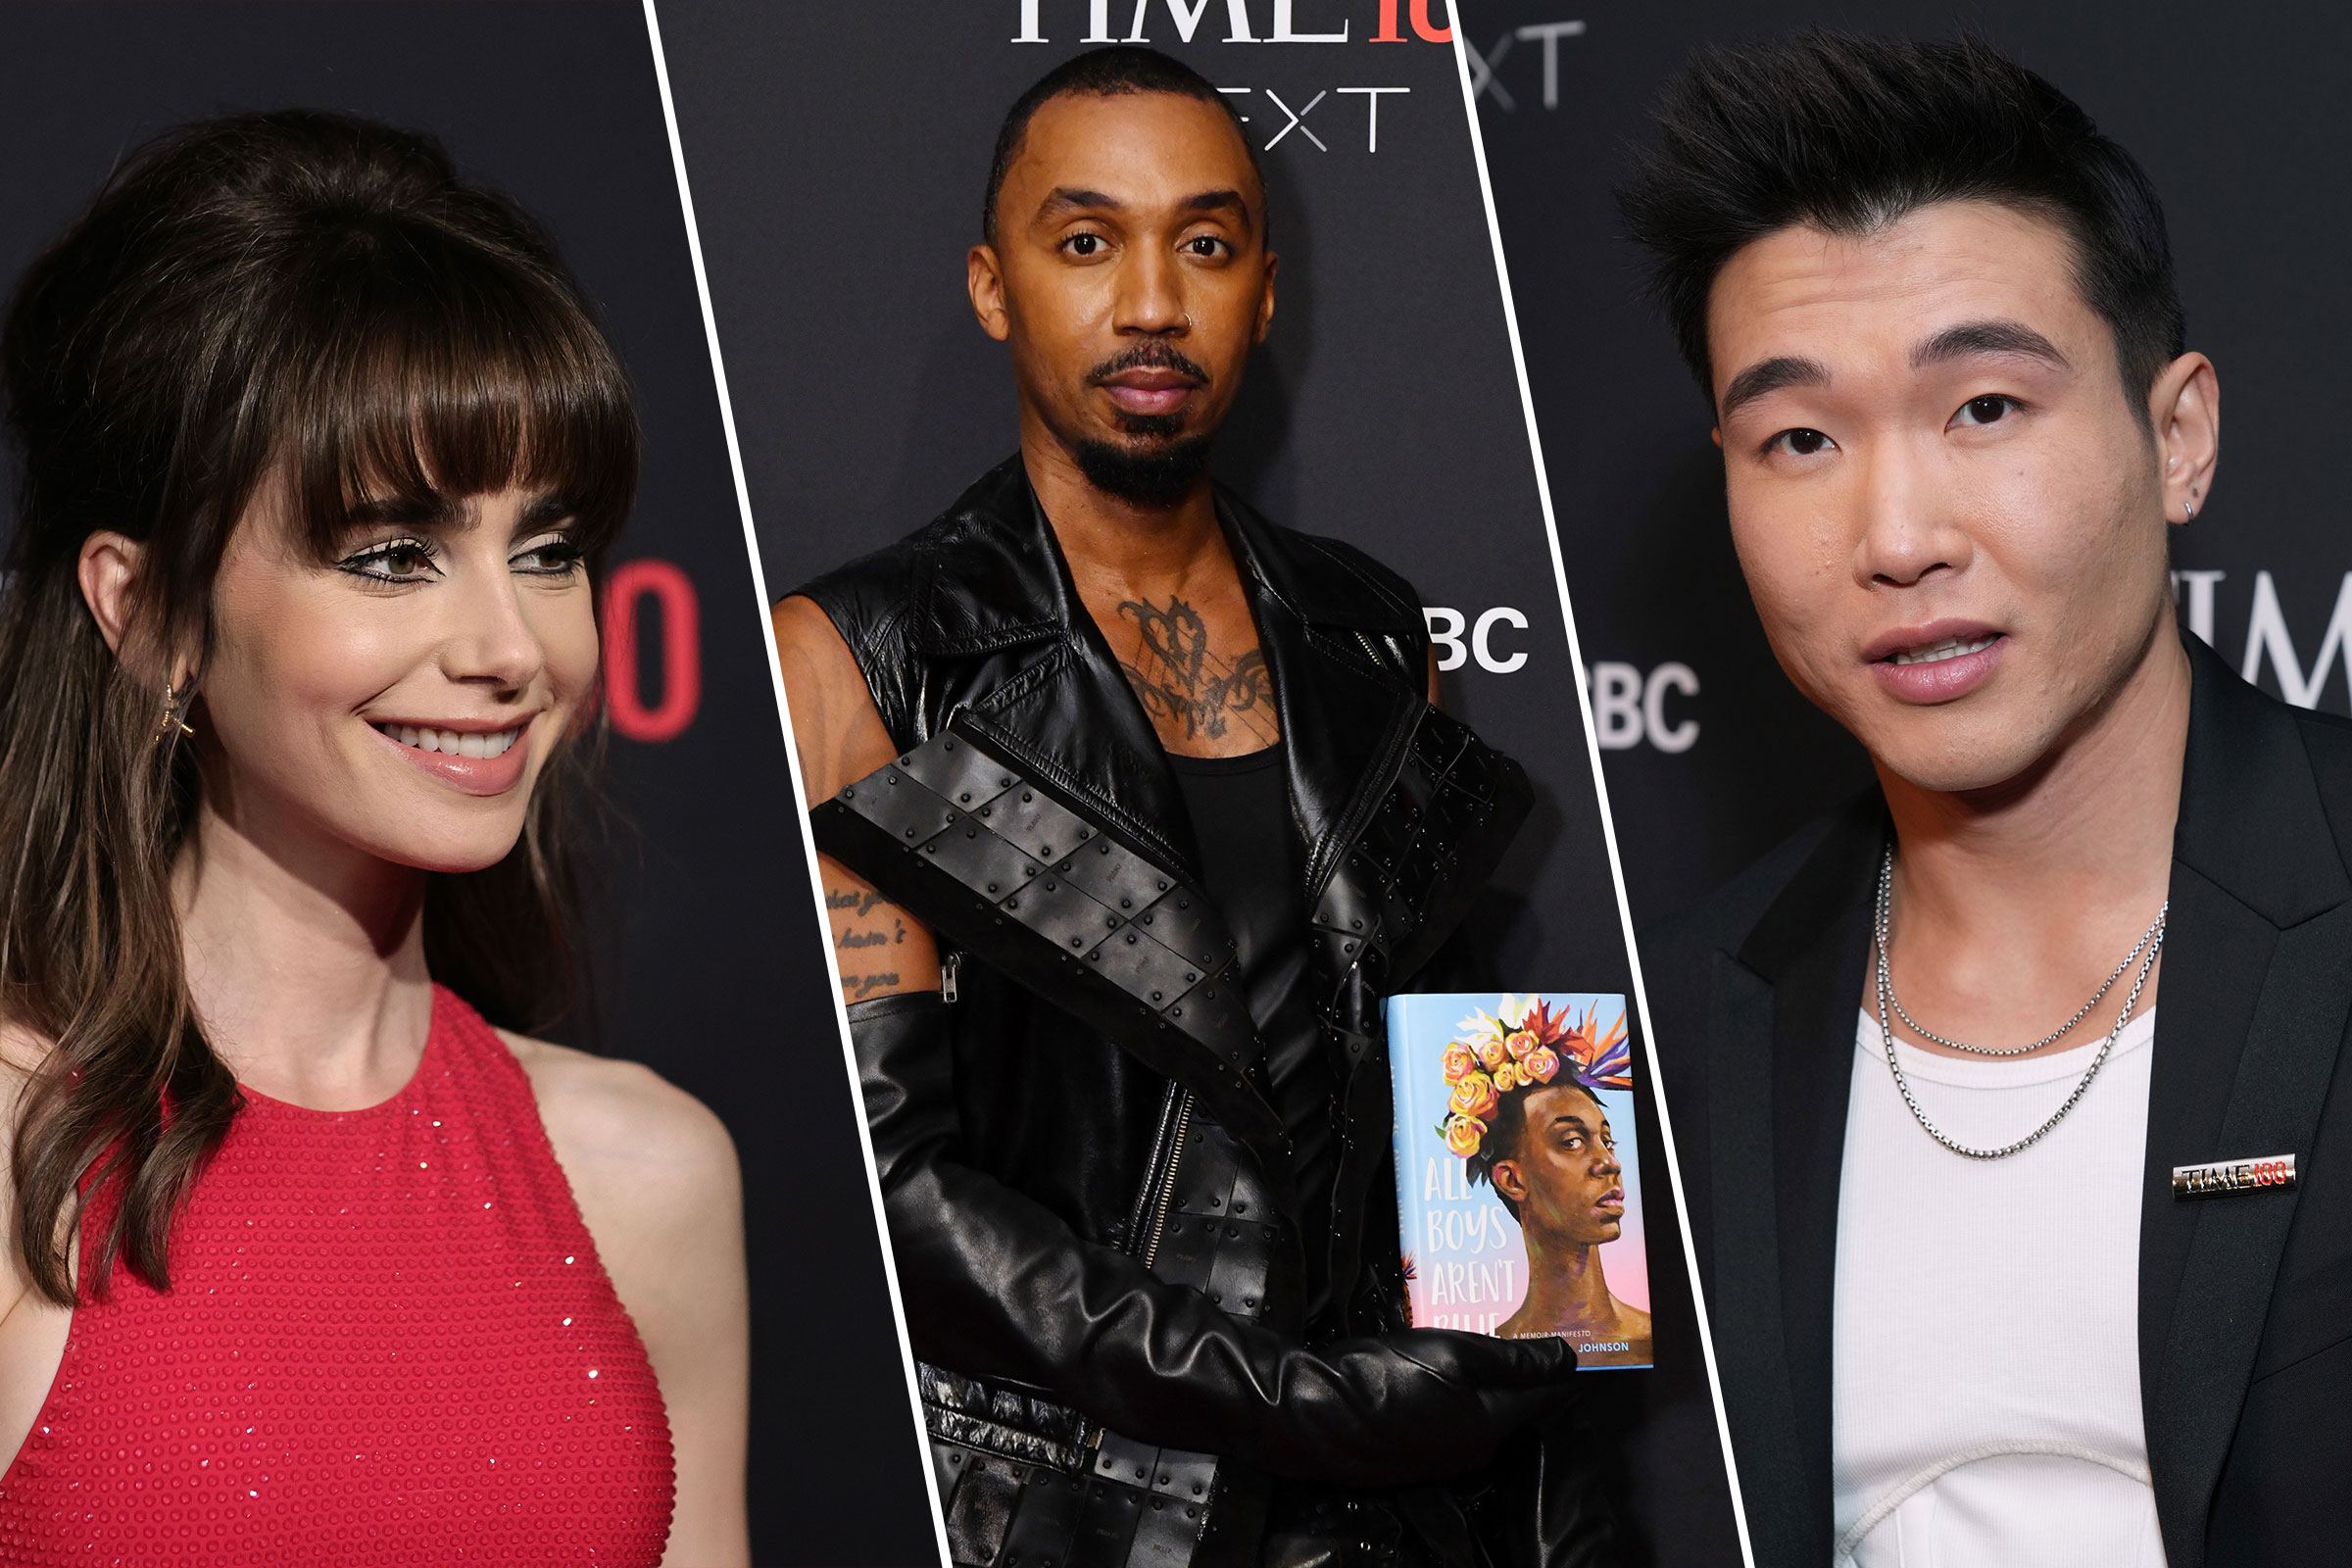 Lily Collins, George M. Johnson, and Joel Kim Booster at the TIME100 Next Gala in New York City on Oct. 25, 2022. (Jamie McCarthy—Getty Images; Craig Barritt—Getty Images for TIME; Kevin Mazur—Getty Images for TIME)